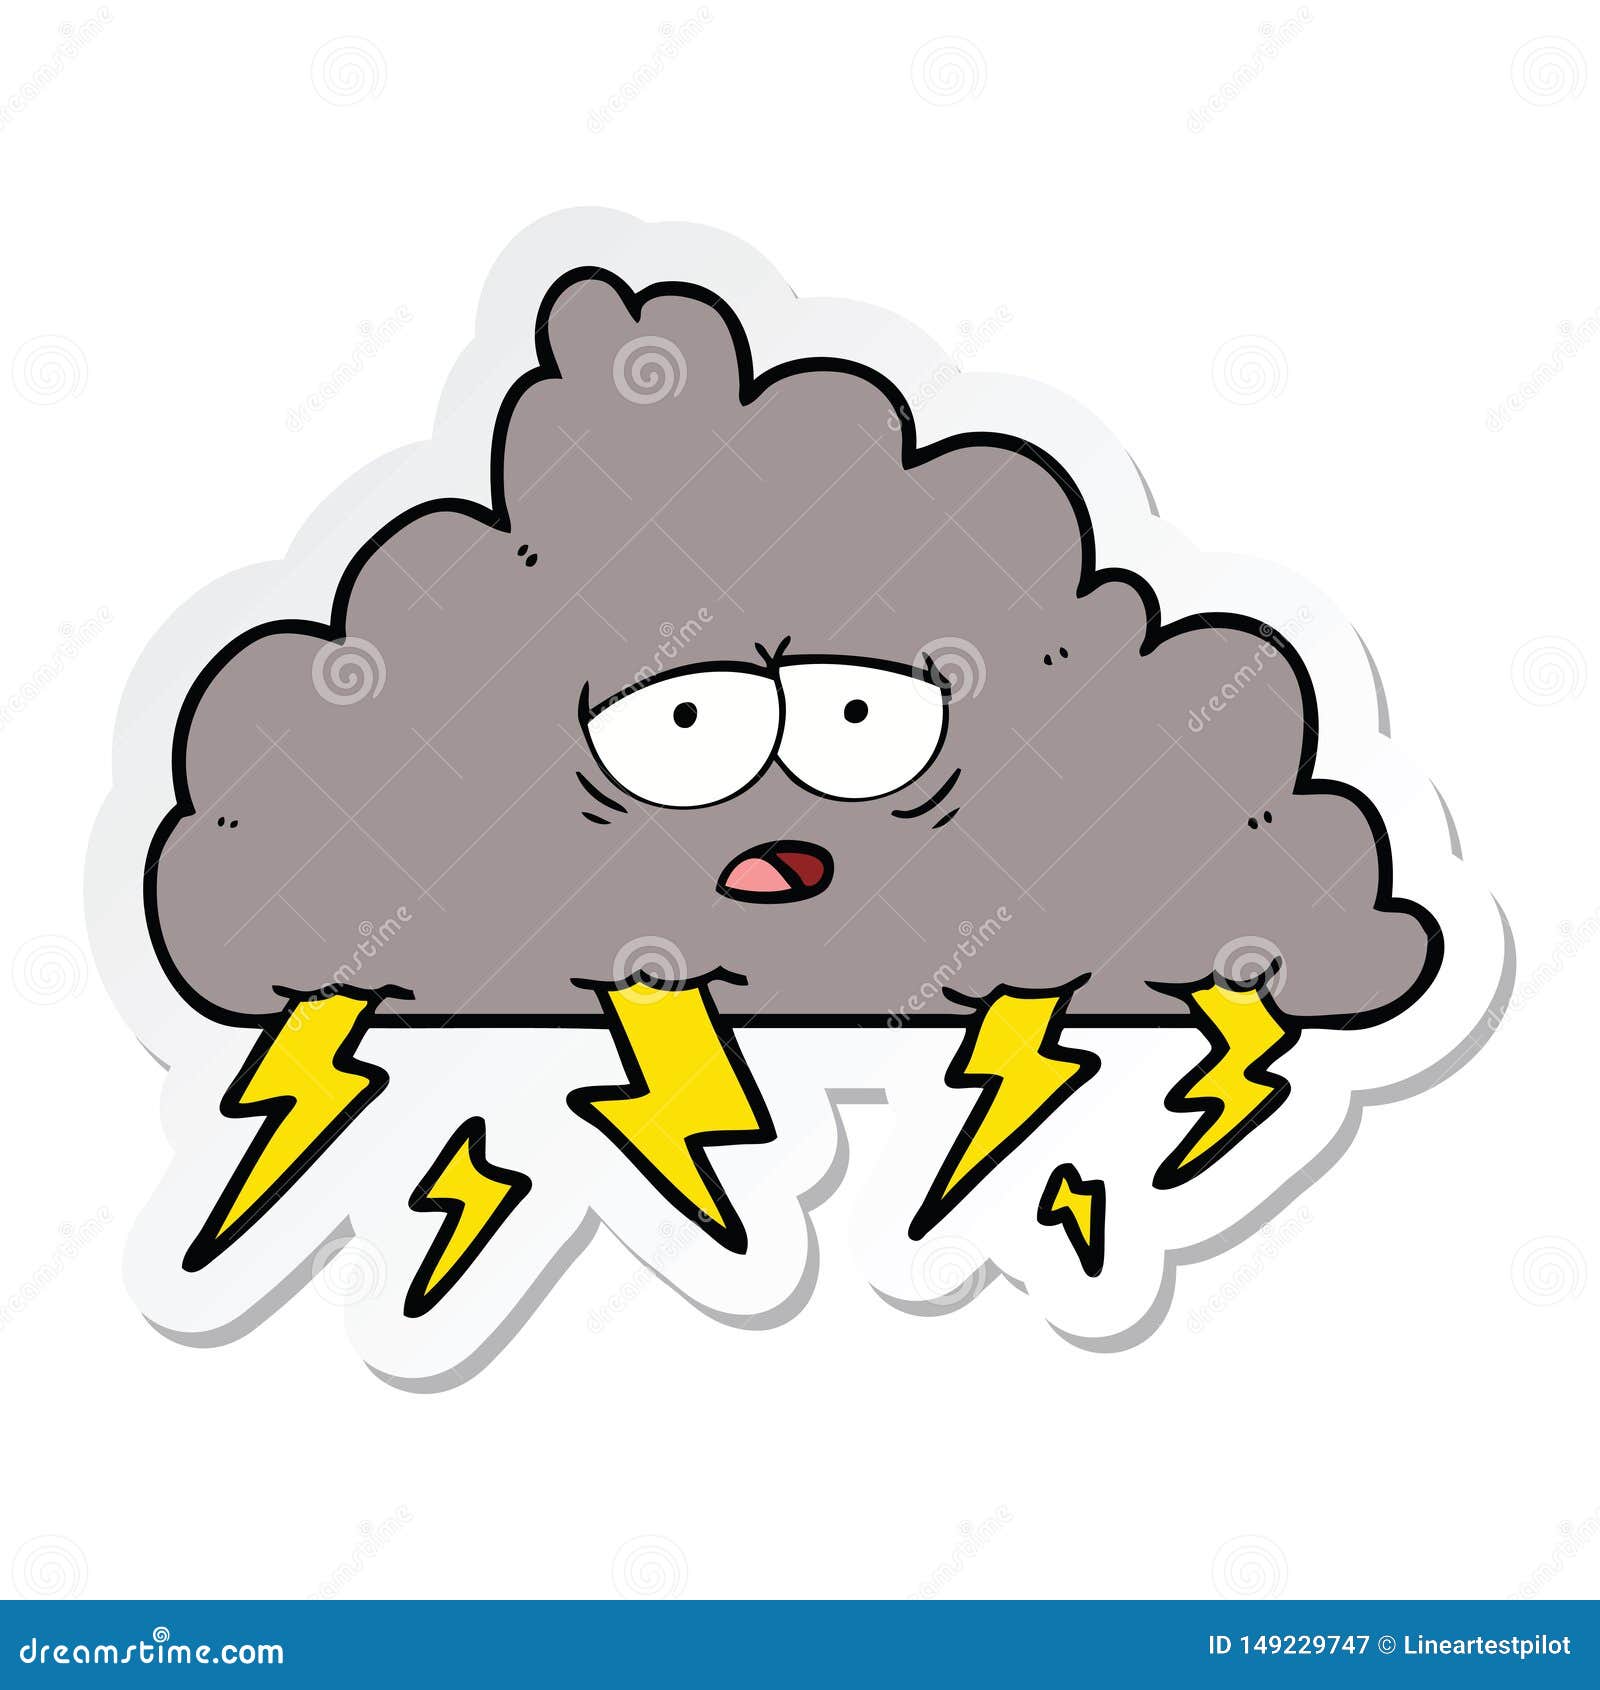 Sticker of a Cartoon Storm Cloud Stock Vector - Illustration of quirky ...